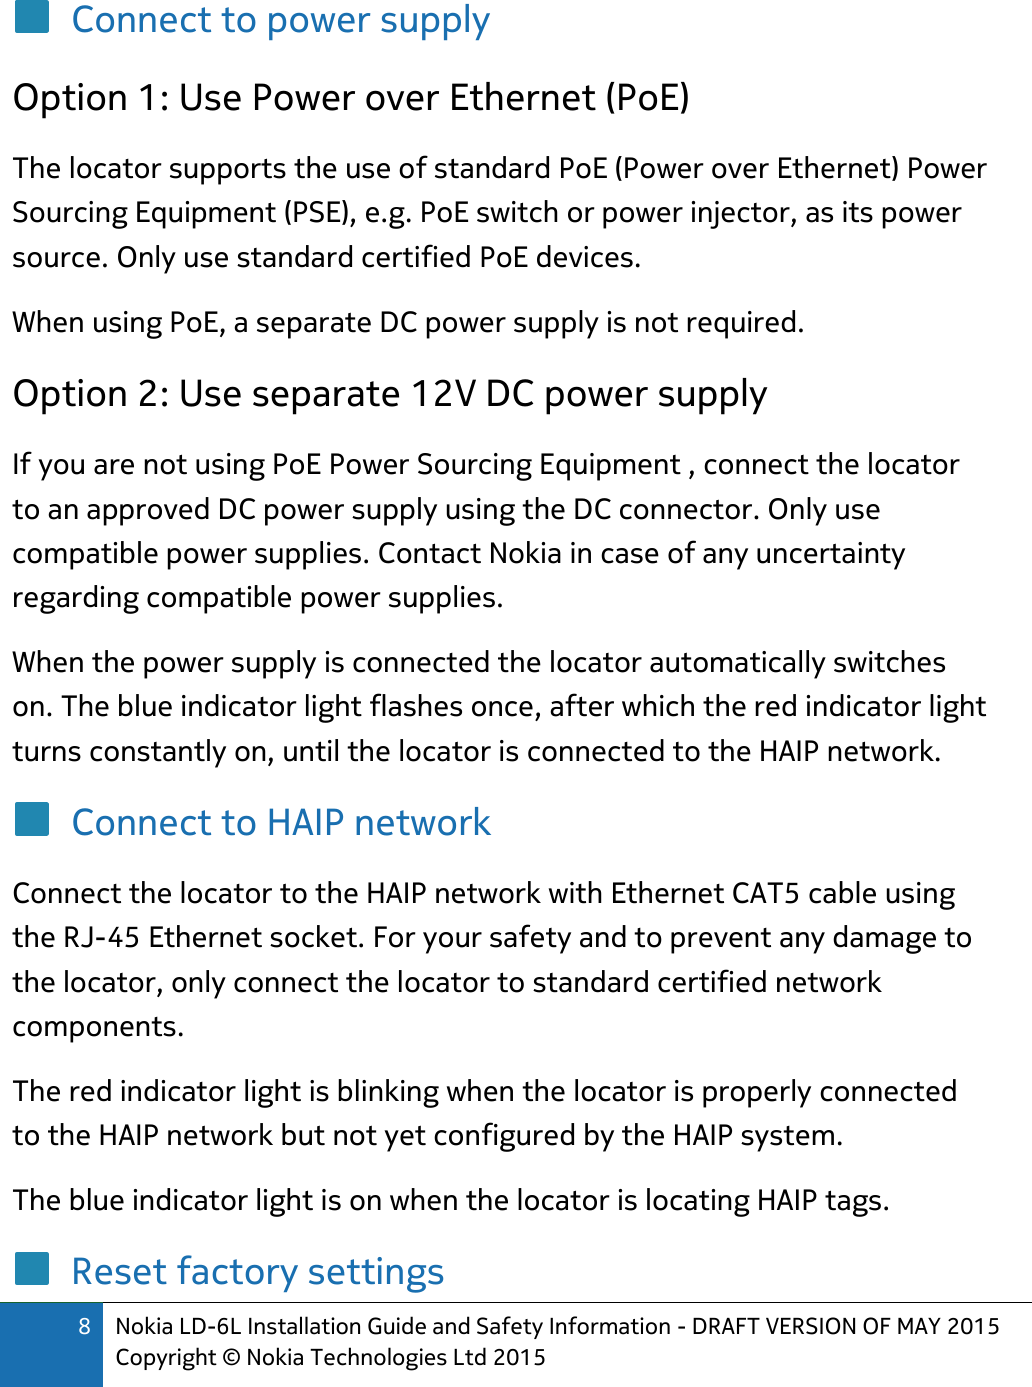 8 Nokia LD-6L Installation Guide and Safety Information - DRAFT VERSION OF MAY 2015 Copyright © Nokia Technologies Ltd 2015  Connect to power supply Option 1: Use Power over Ethernet (PoE) The locator supports the use of standard PoE (Power over Ethernet) Power Sourcing Equipment (PSE), e.g. PoE switch or power injector, as its power source. Only use standard certified PoE devices. When using PoE, a separate DC power supply is not required.  Option 2: Use separate 12V DC power supply If you are not using PoE Power Sourcing Equipment , connect the locator to an approved DC power supply using the DC connector. Only use compatible power supplies. Contact Nokia in case of any uncertainty regarding compatible power supplies. When the power supply is connected the locator automatically switches on. The blue indicator light flashes once, after which the red indicator light turns constantly on, until the locator is connected to the HAIP network. Connect to HAIP network Connect the locator to the HAIP network with Ethernet CAT5 cable using the RJ-45 Ethernet socket. For your safety and to prevent any damage to the locator, only connect the locator to standard certified network components. The red indicator light is blinking when the locator is properly connected to the HAIP network but not yet configured by the HAIP system. The blue indicator light is on when the locator is locating HAIP tags. Reset factory settings 